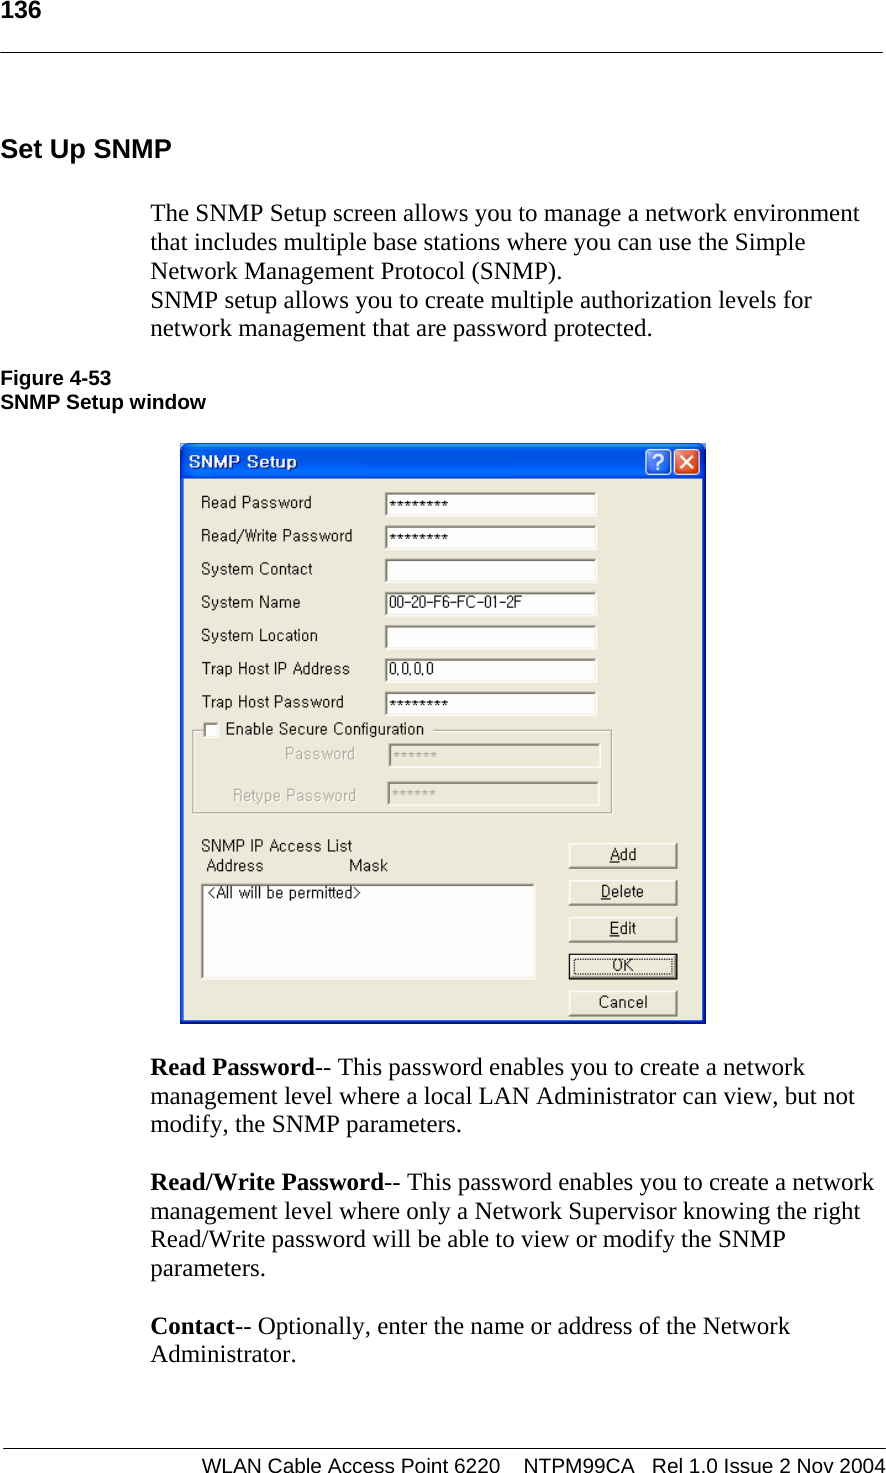   136  WLAN Cable Access Point 6220    NTPM99CA   Rel 1.0 Issue 2 Nov 2004 Set Up SNMP  The SNMP Setup screen allows you to manage a network environment that includes multiple base stations where you can use the Simple Network Management Protocol (SNMP).  SNMP setup allows you to create multiple authorization levels for network management that are password protected.  Figure 4-53 SNMP Setup window    Read Password-- This password enables you to create a network management level where a local LAN Administrator can view, but not modify, the SNMP parameters.  Read/Write Password-- This password enables you to create a network management level where only a Network Supervisor knowing the right Read/Write password will be able to view or modify the SNMP parameters.  Contact-- Optionally, enter the name or address of the Network Administrator.   